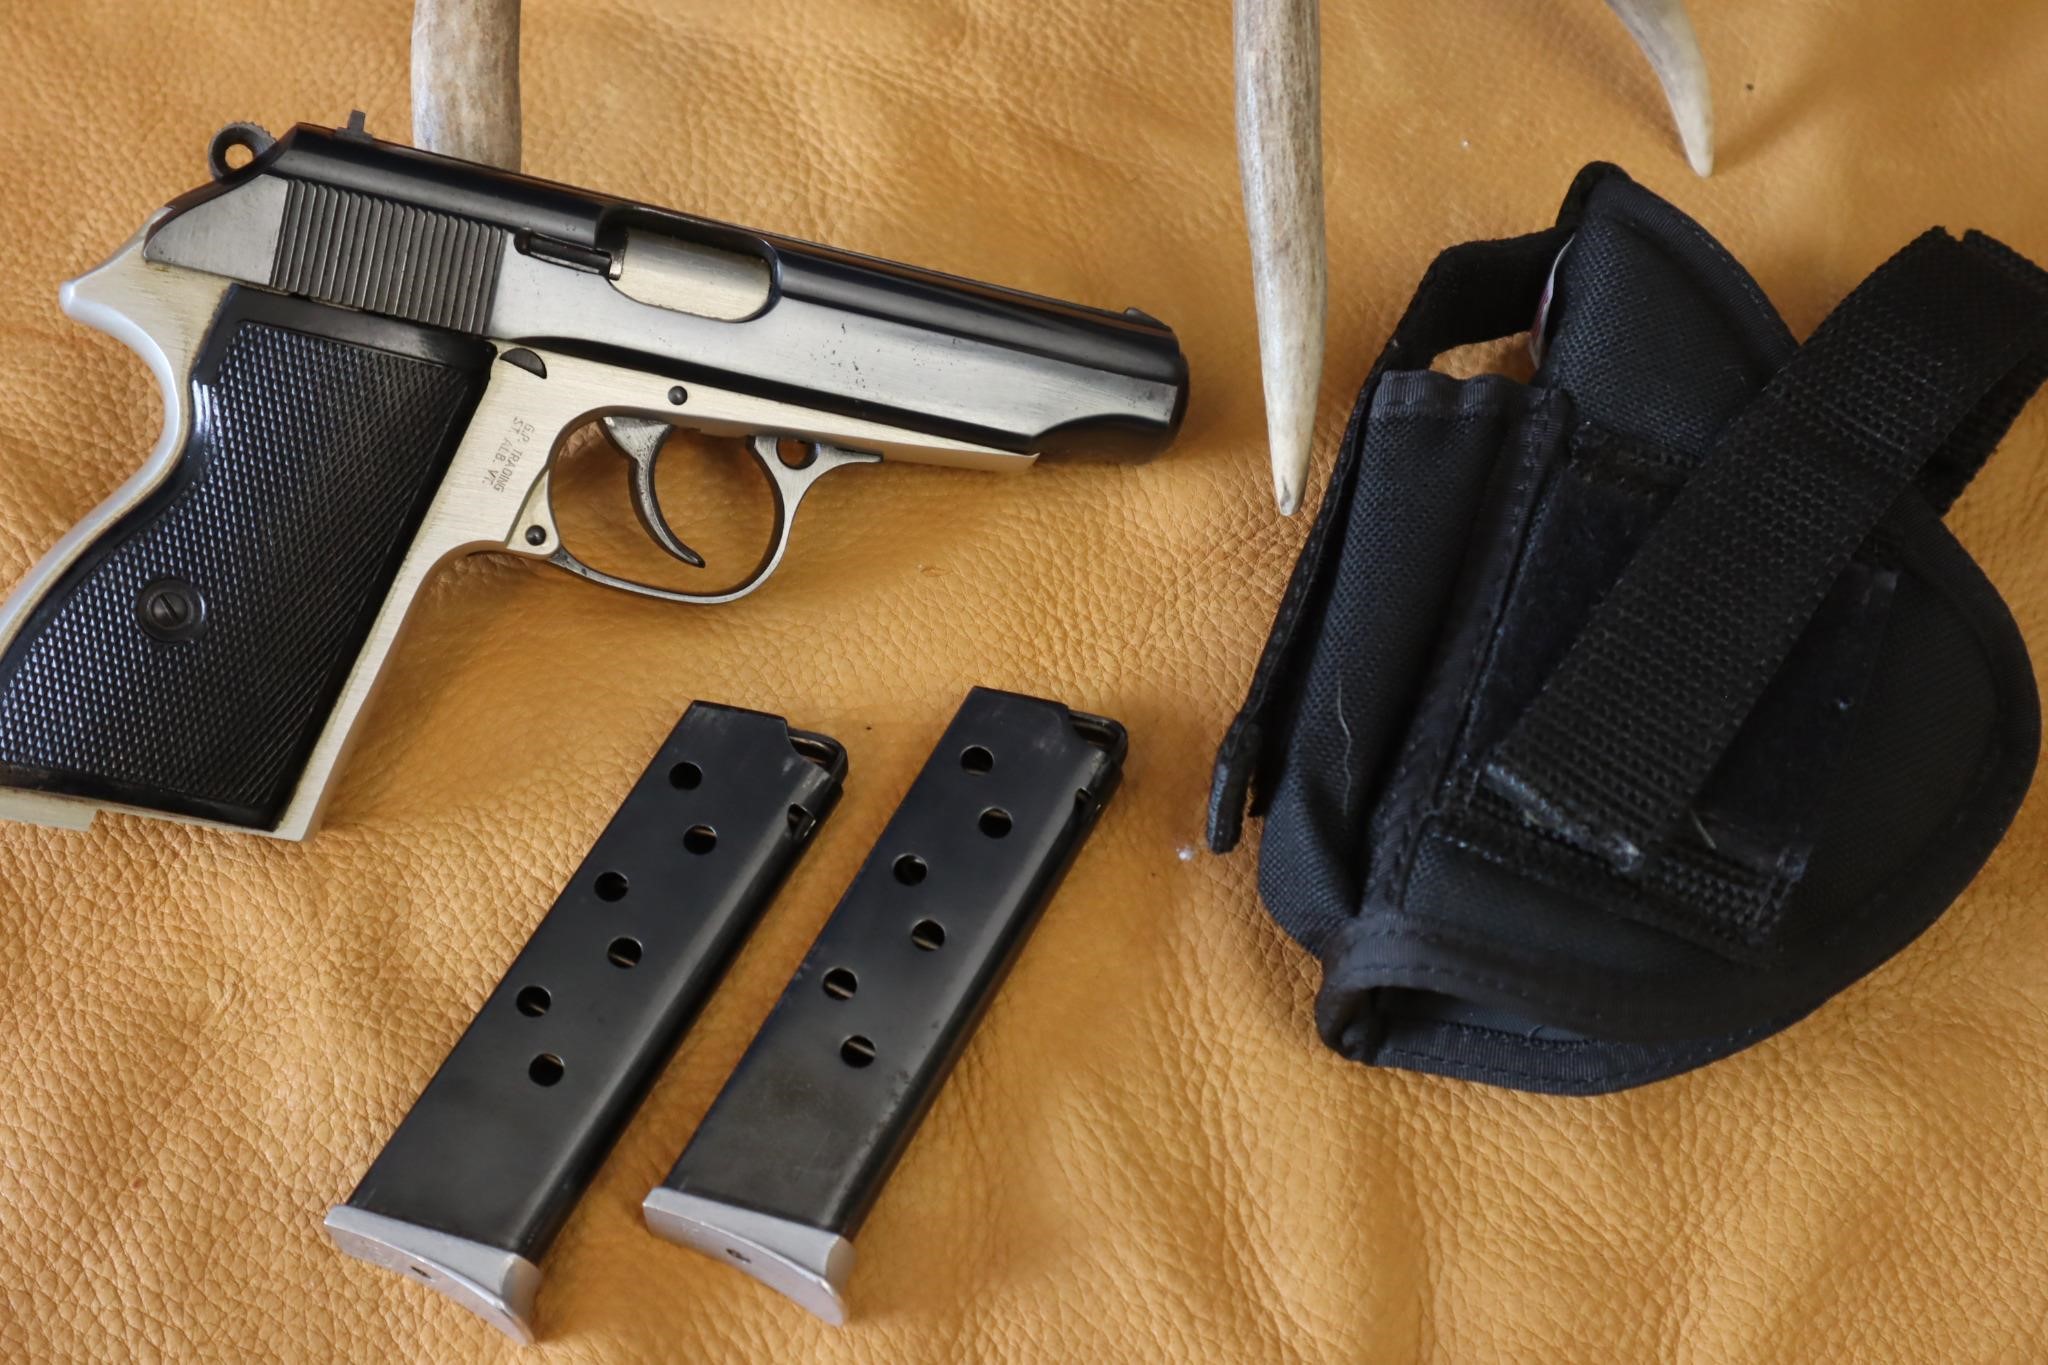 FEG PA-63 in 9x18, duo-tone, w/holster, 2 mags